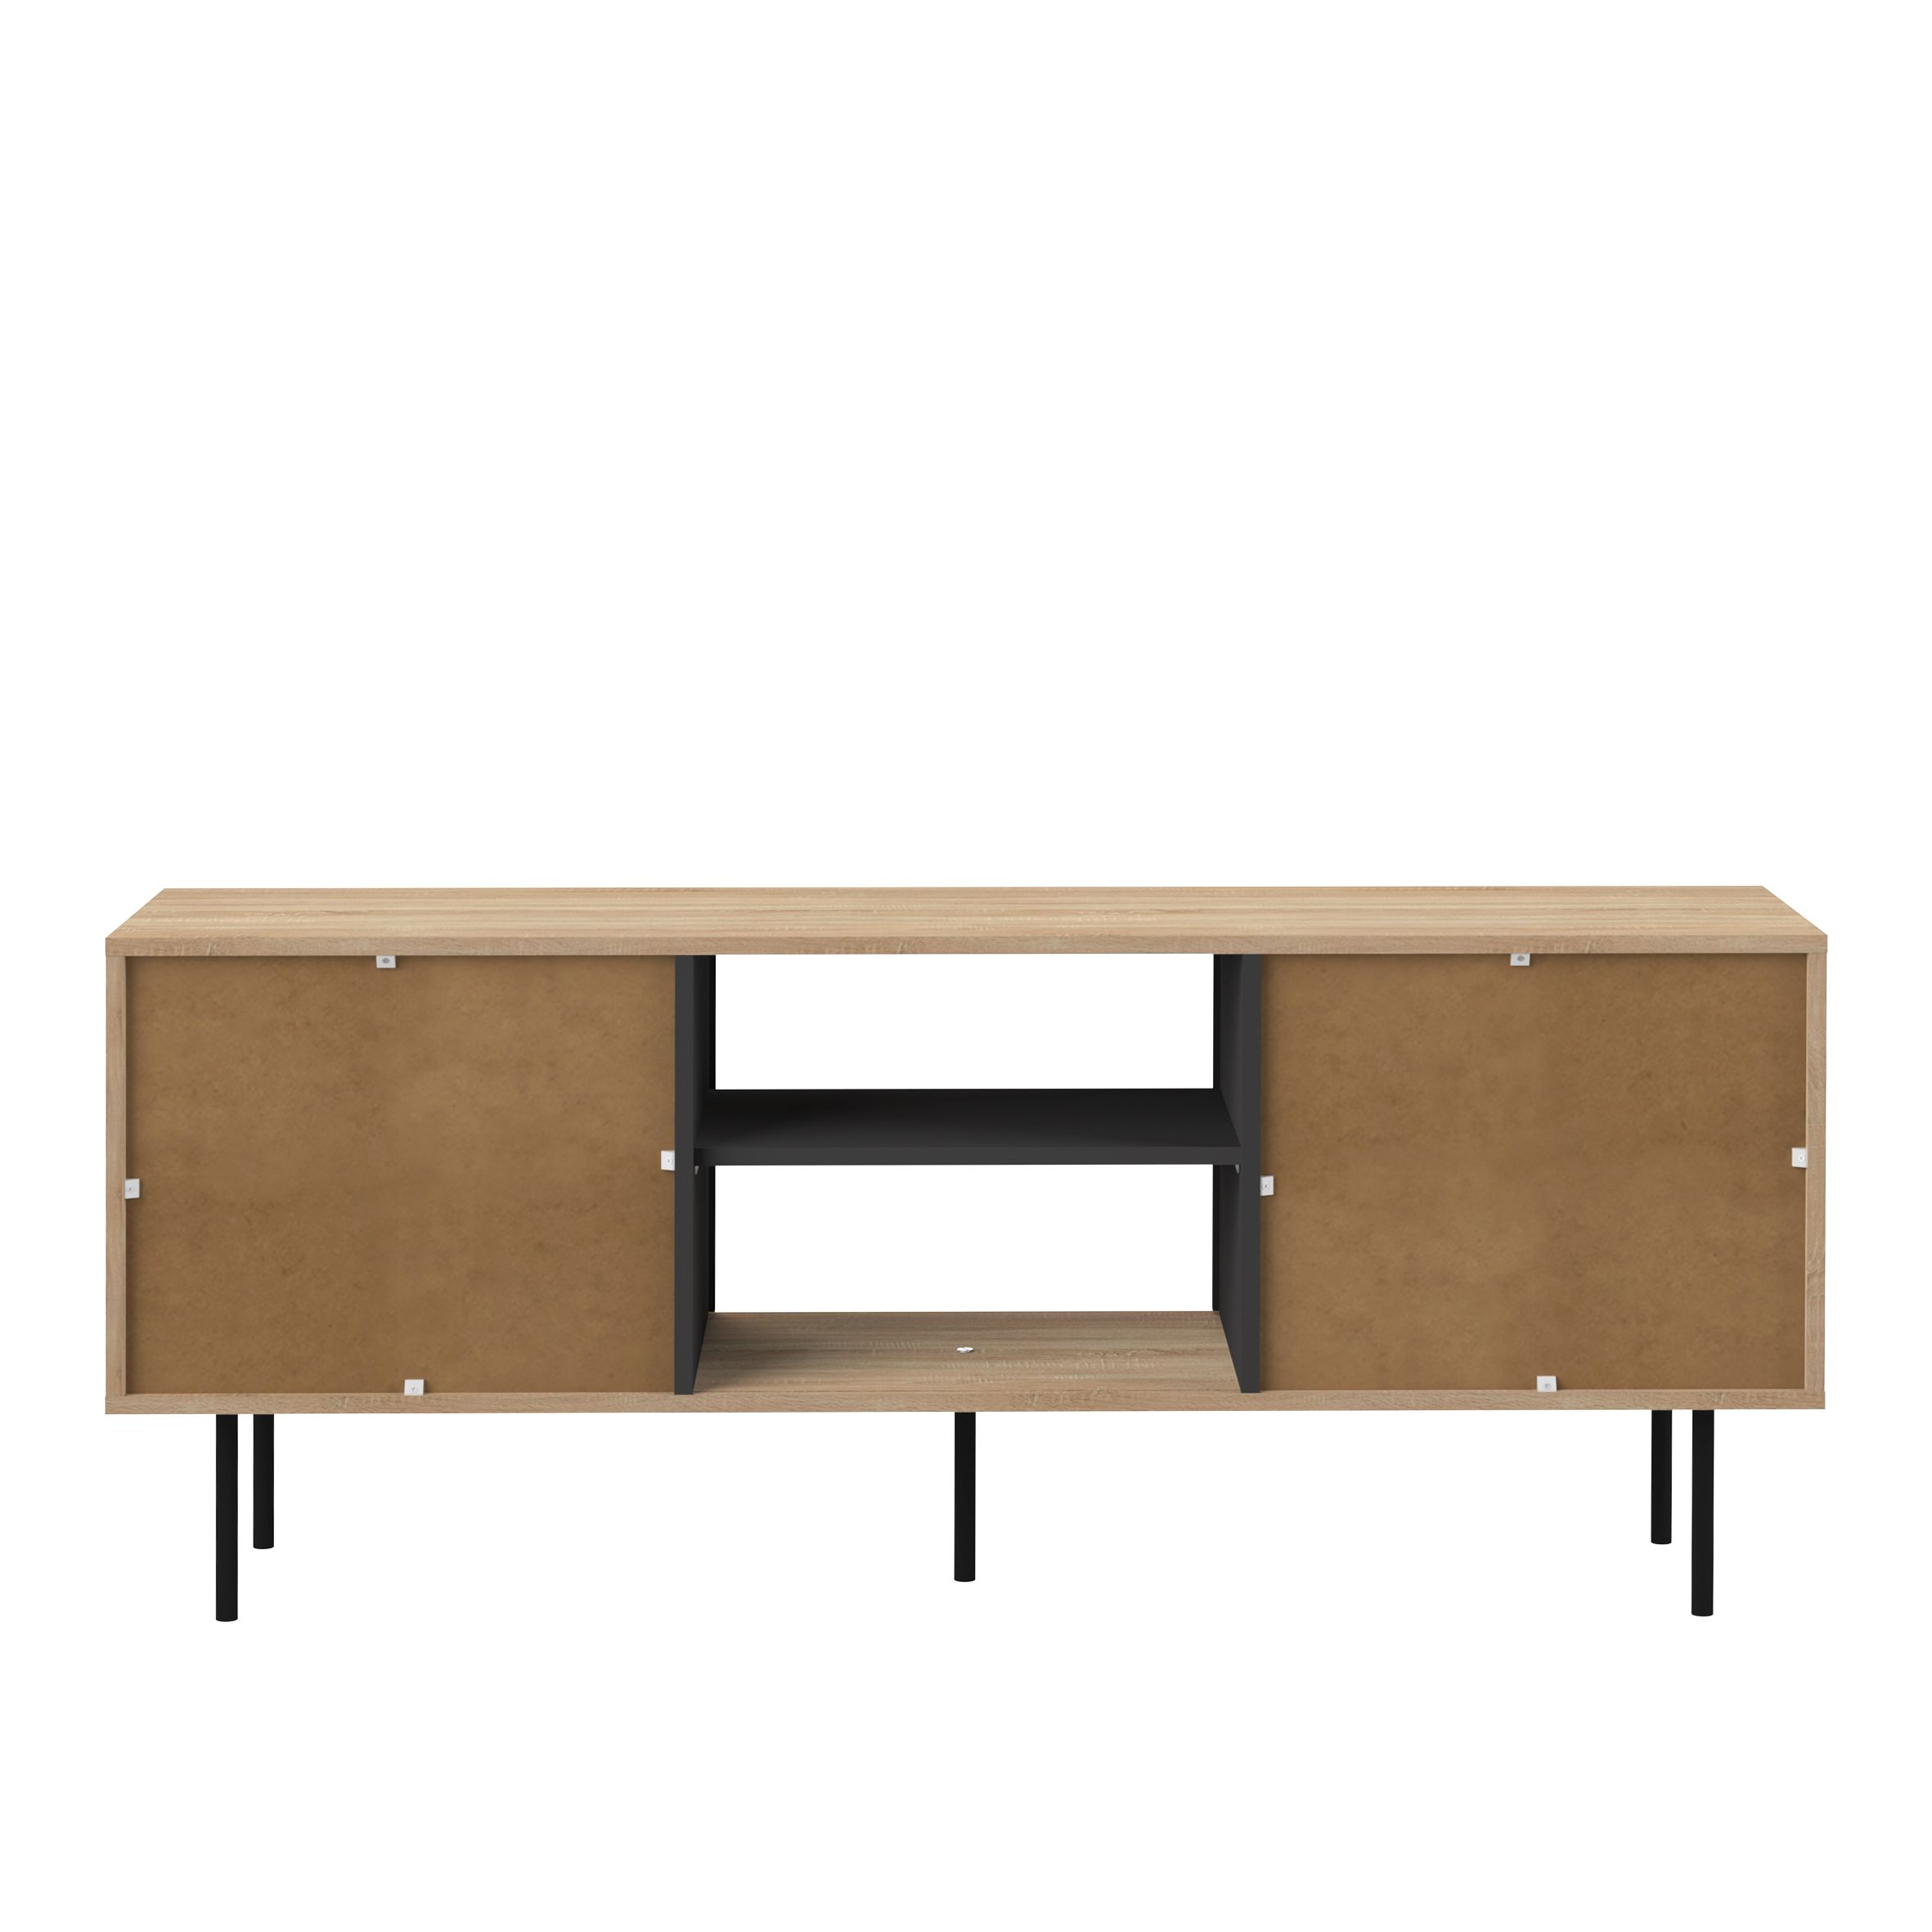 Altitude TV Stand Natural Oak/Black by Temahome